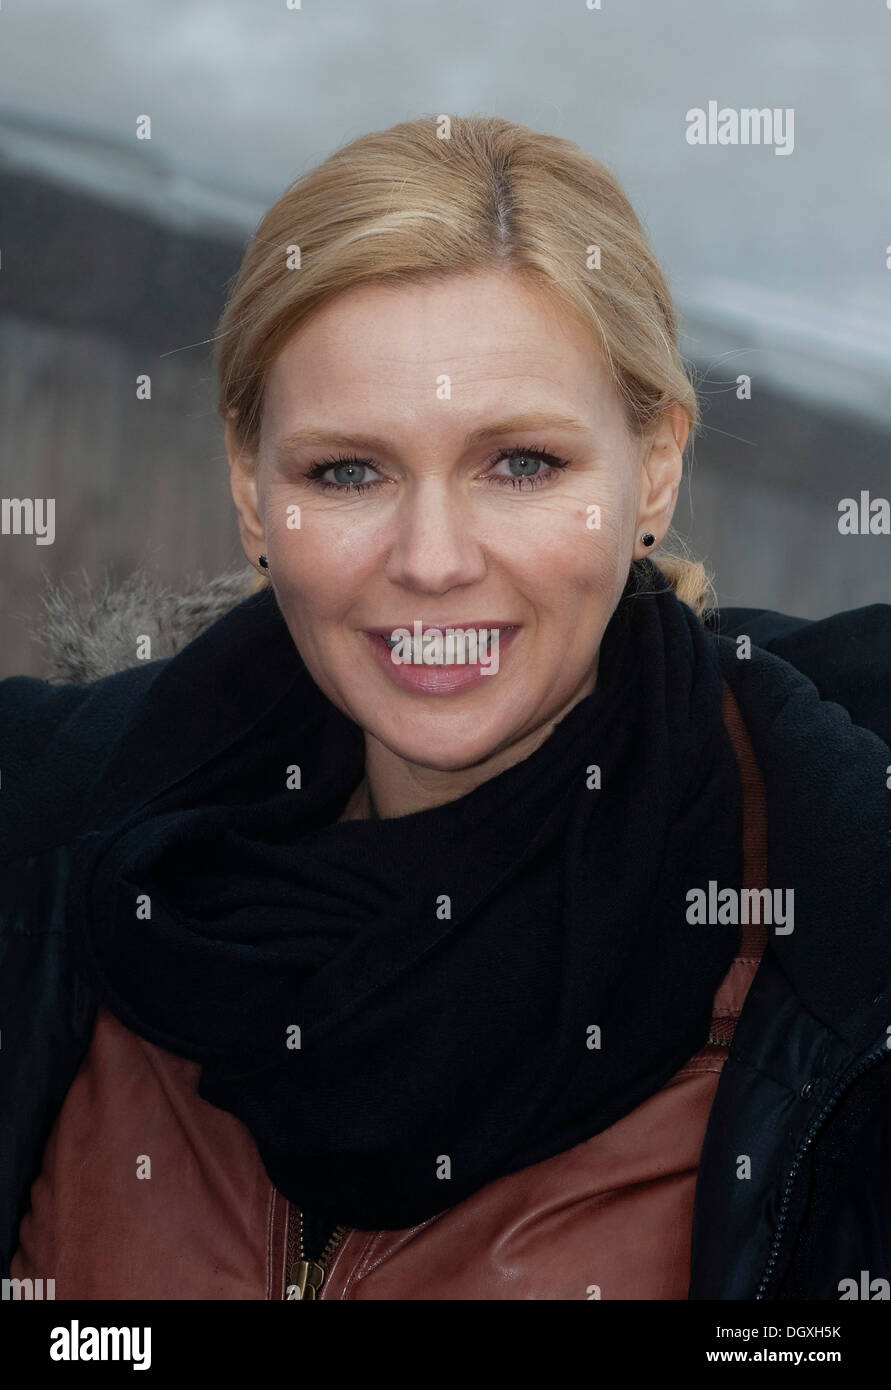 Actress Veronica Ferres at a photocall, Mittenwald, Bavaria, Germany Stock Photo